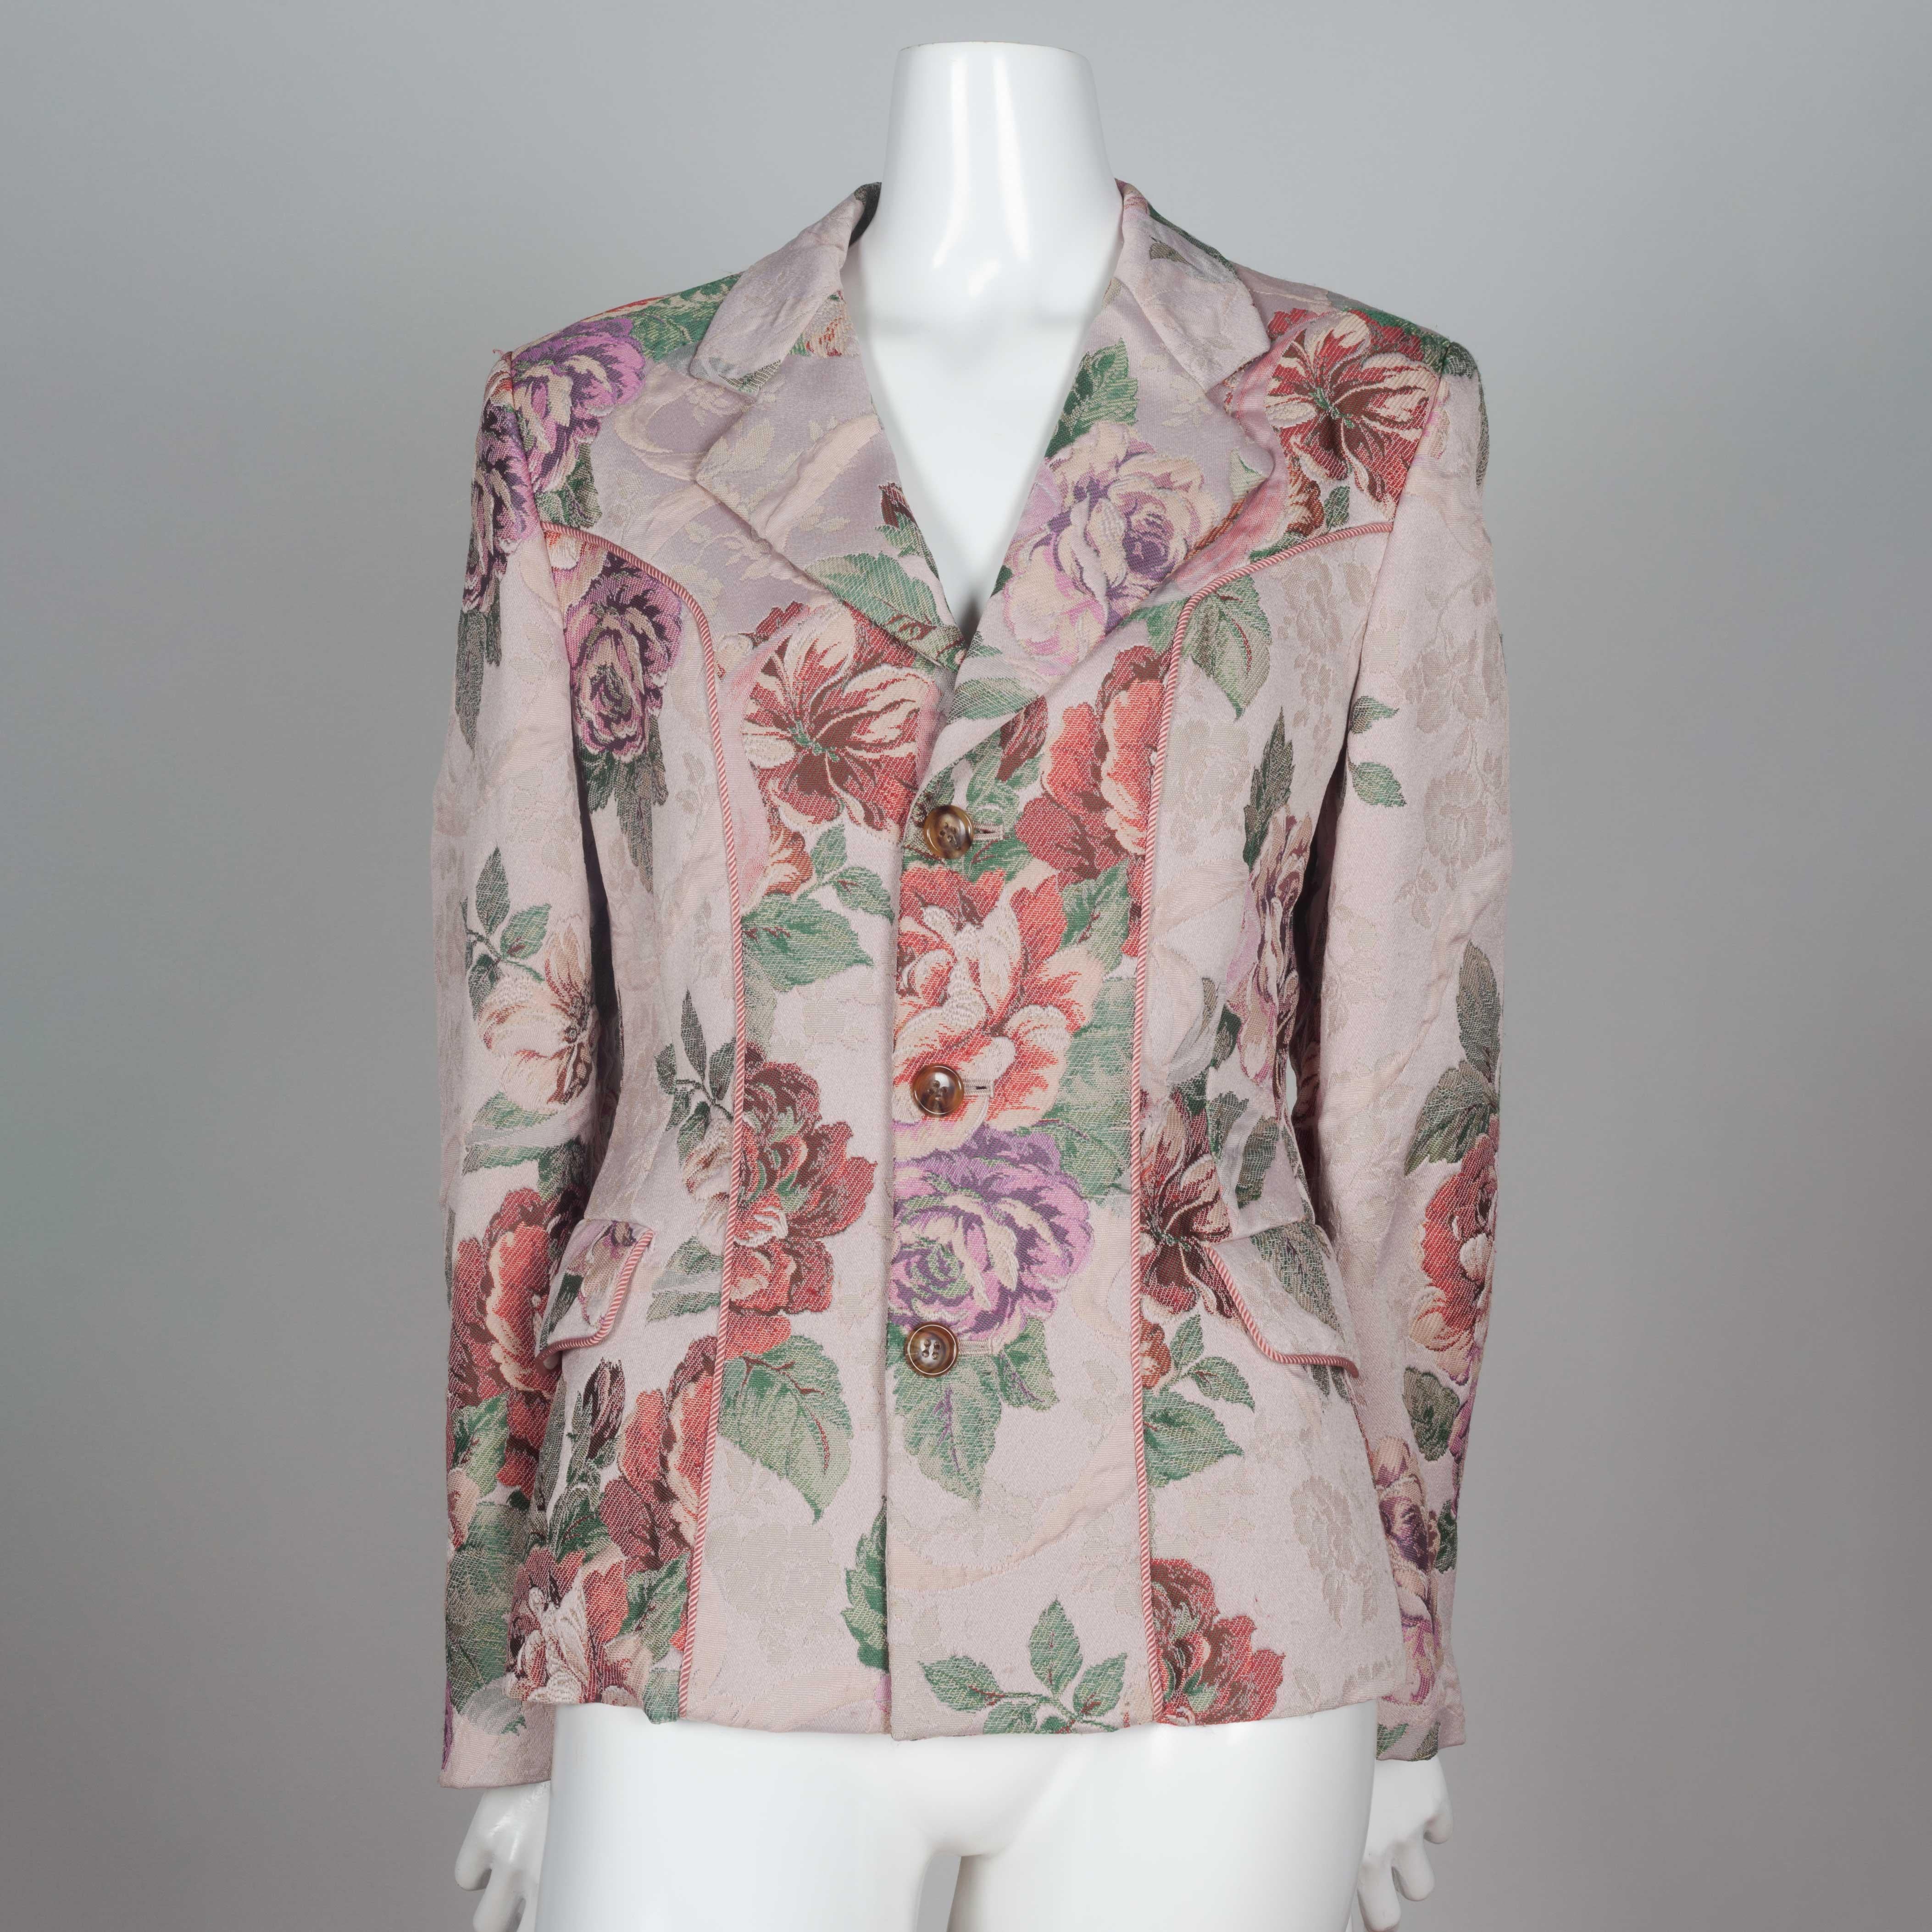 Comme des Garçons Robe de Chambre 1999 single breasted jacket in floral tapestry material with pink vertical cording on front chest and around pocket flaps. Manufacture des Gobelins (The Gobelins Manufactory) weaved the material for this jacket